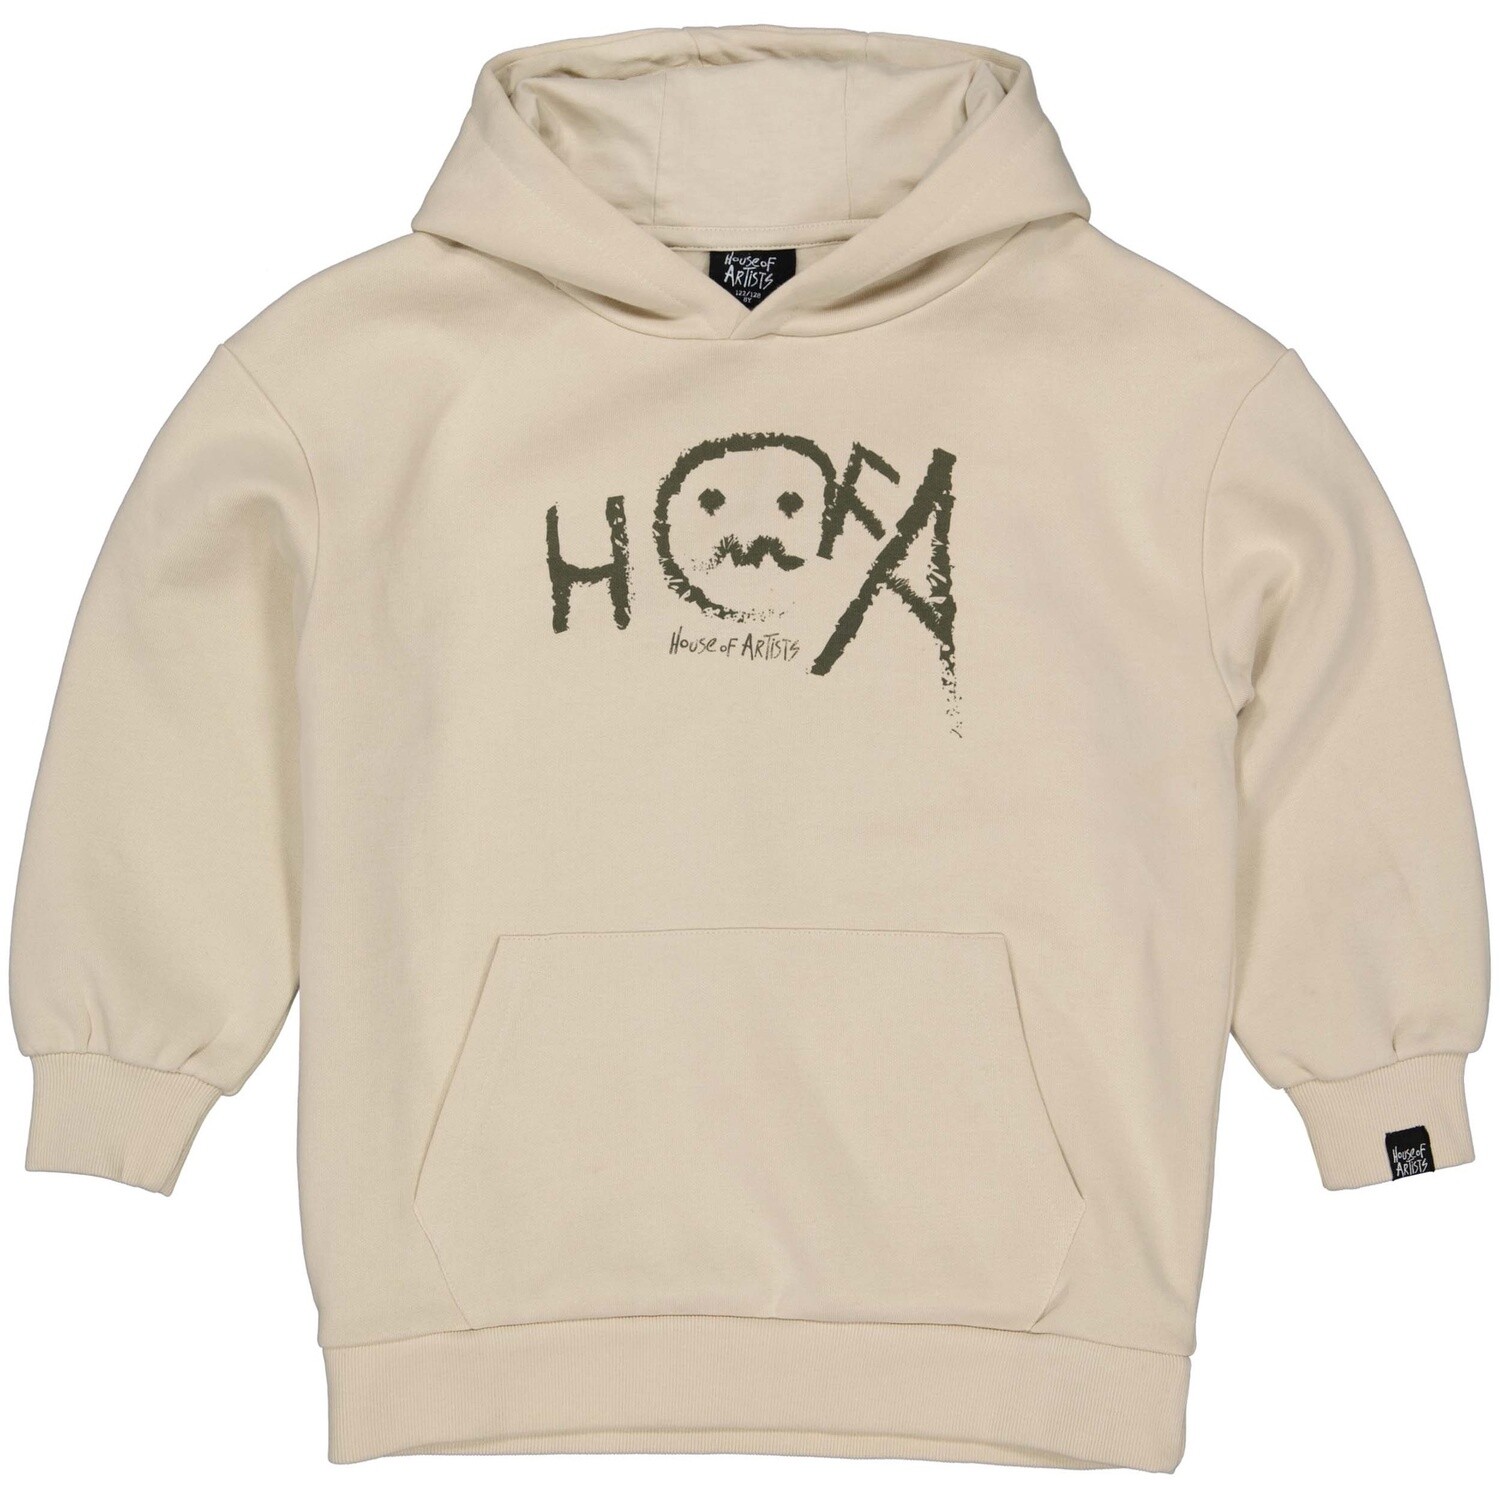 House of Artists Hooded Sweater Kit HA31320620